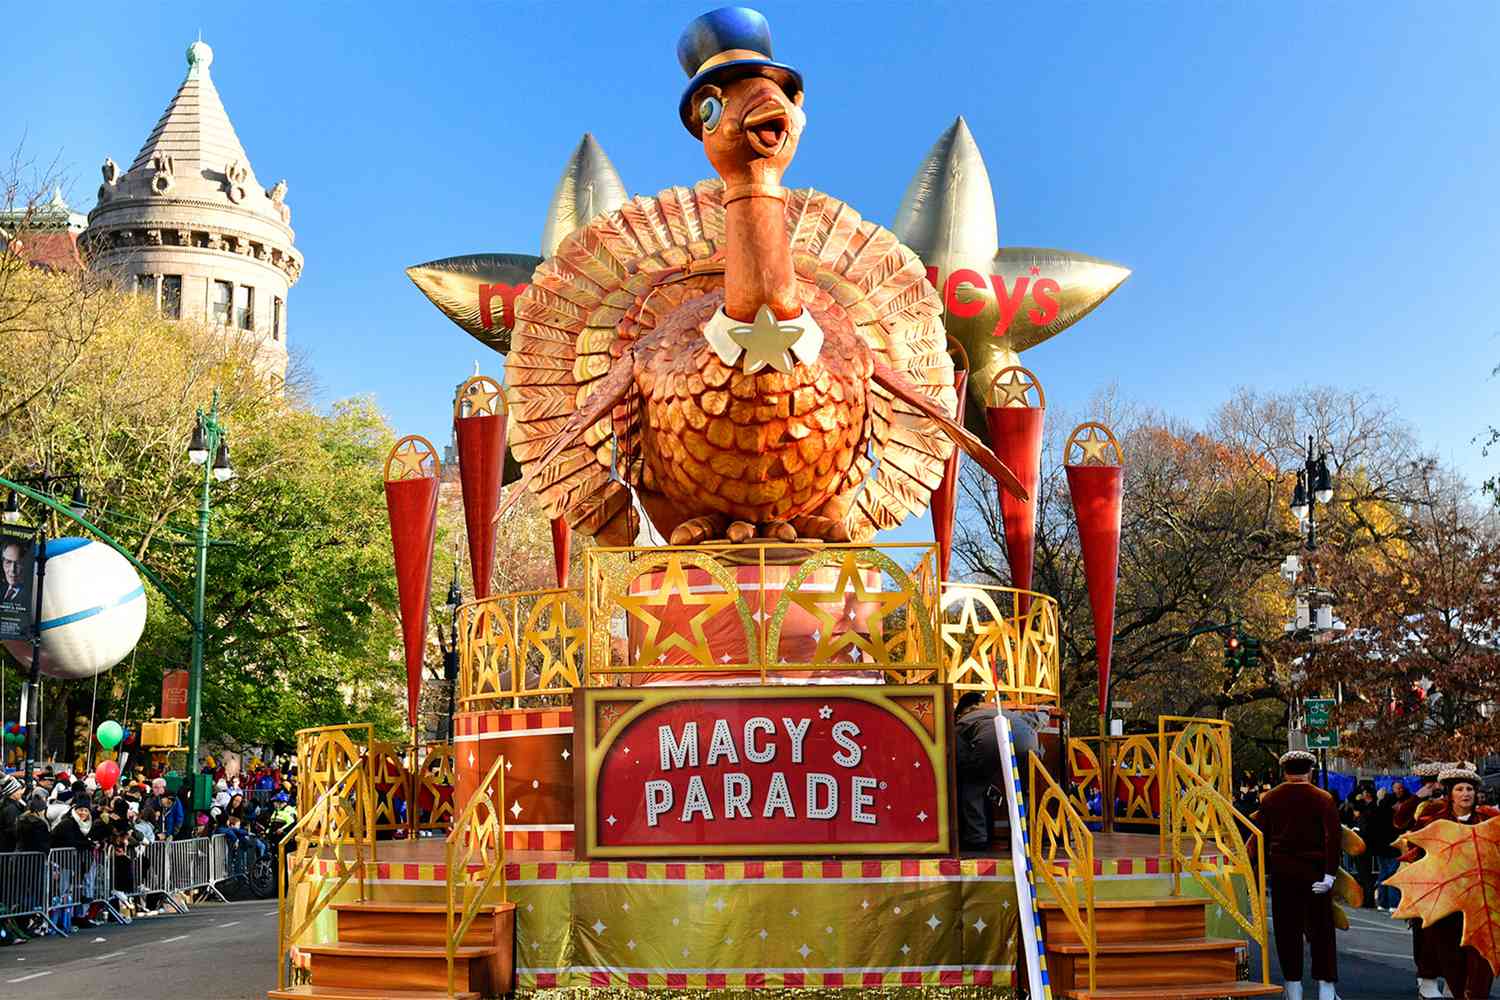 A float with a turkey on it in a parade.